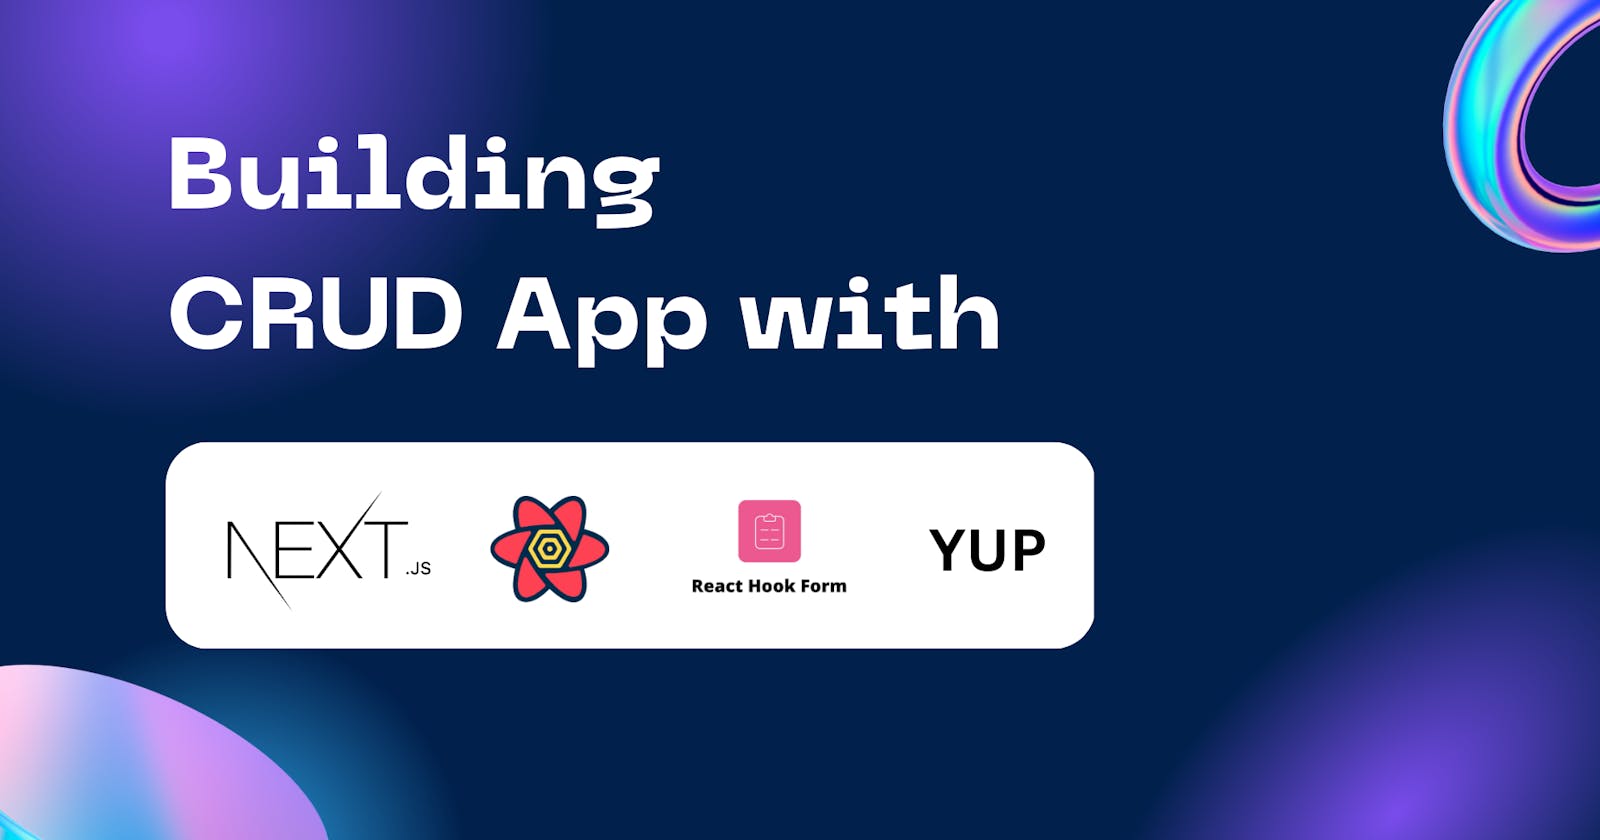 Building a CRUD App with Next.js, React Query, React Hook Form, and Yup